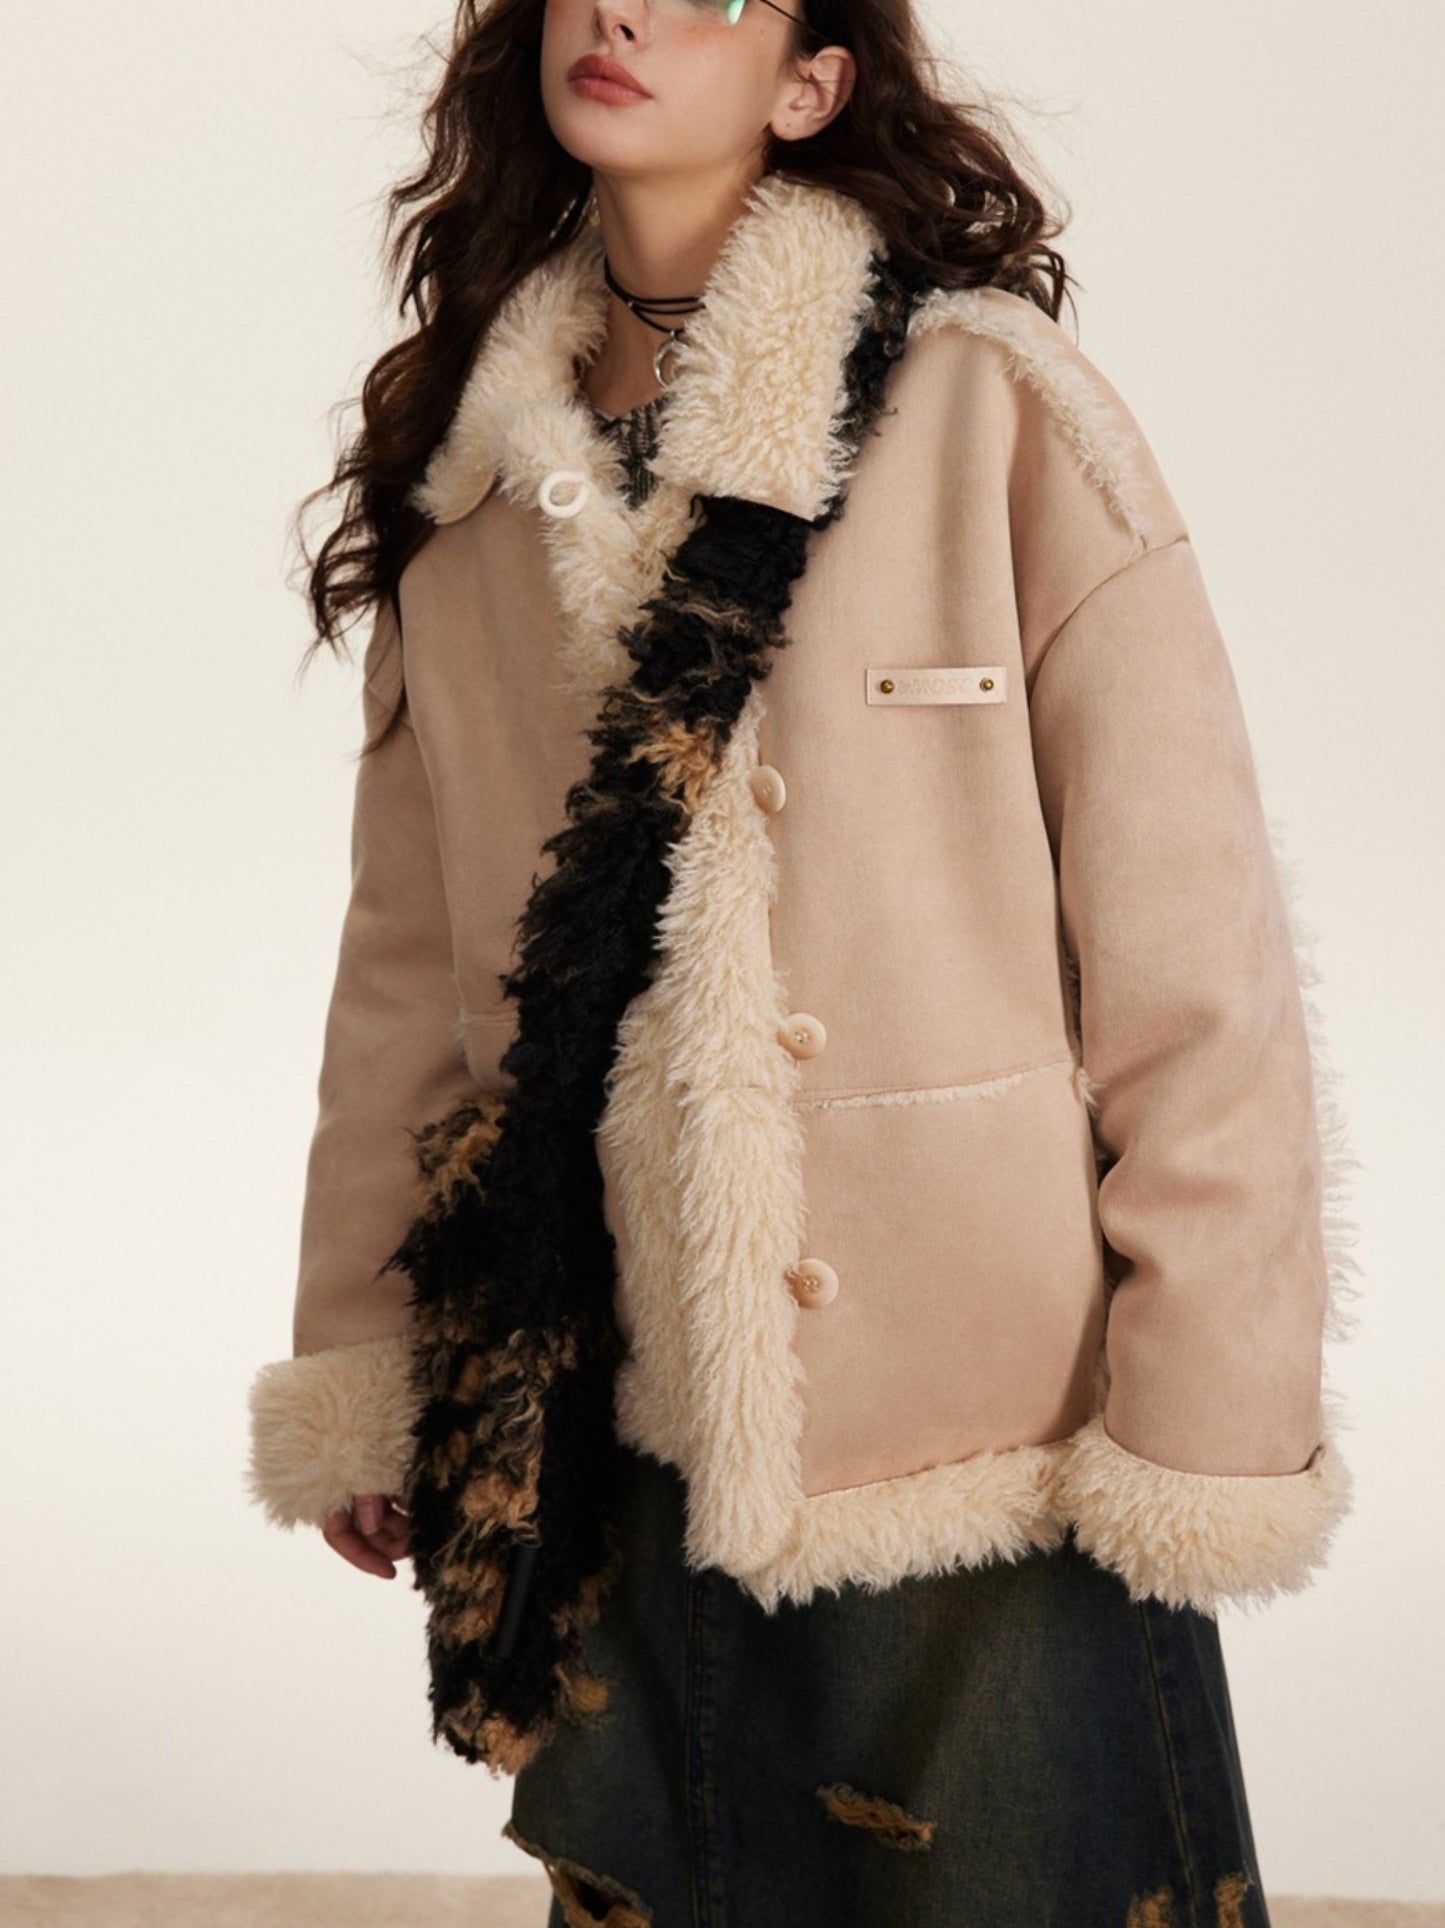 Retro Fur All-in-One Winter Thickened Jacket